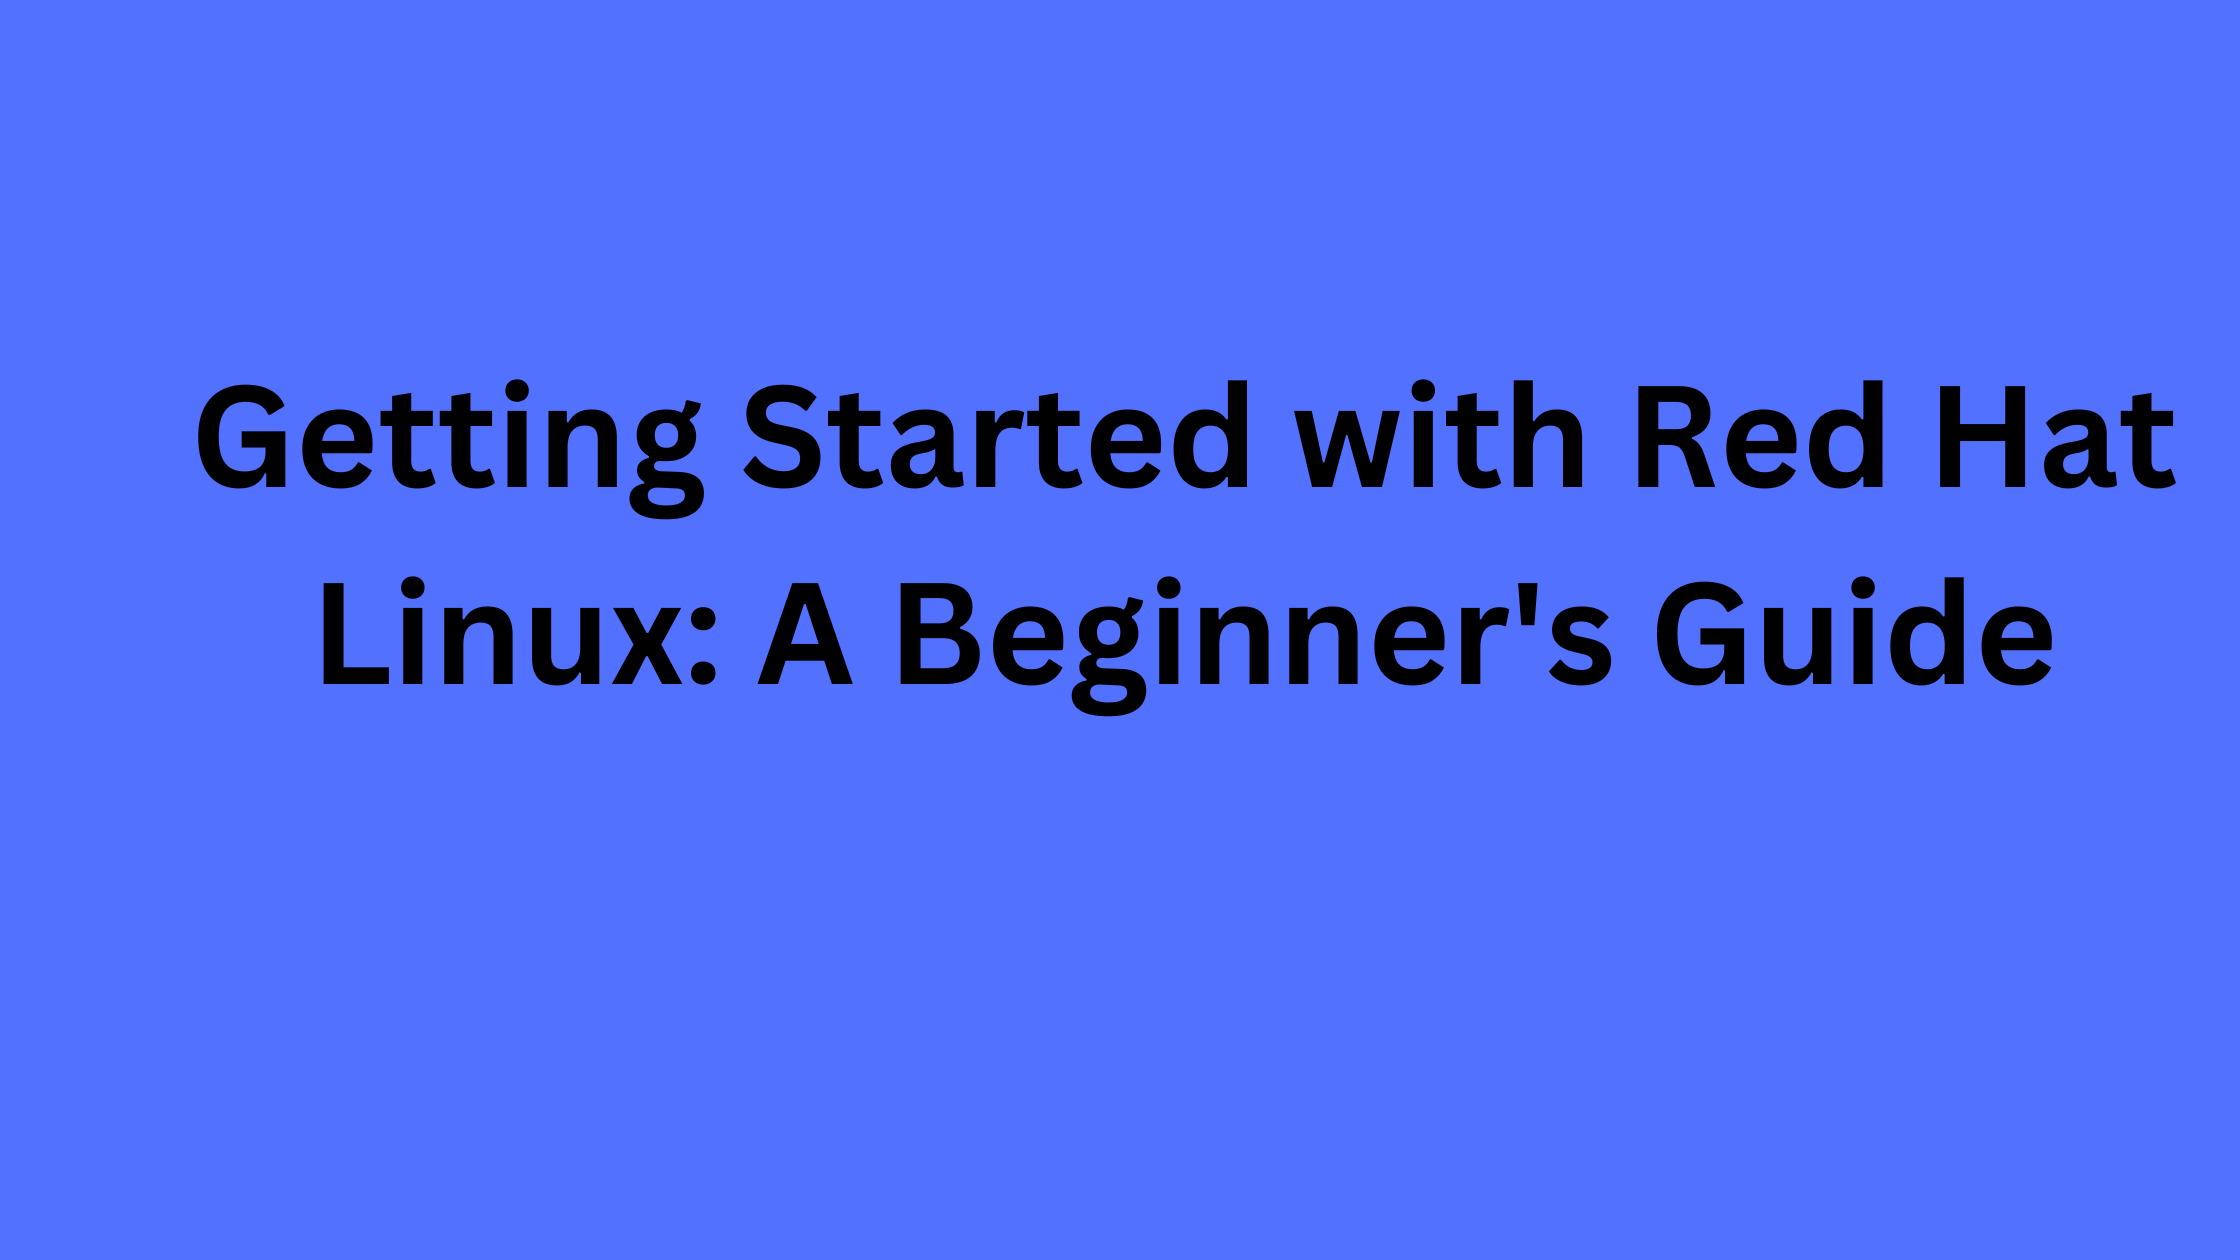 Getting Started with Red Hat Linux: A Beginner's Guide